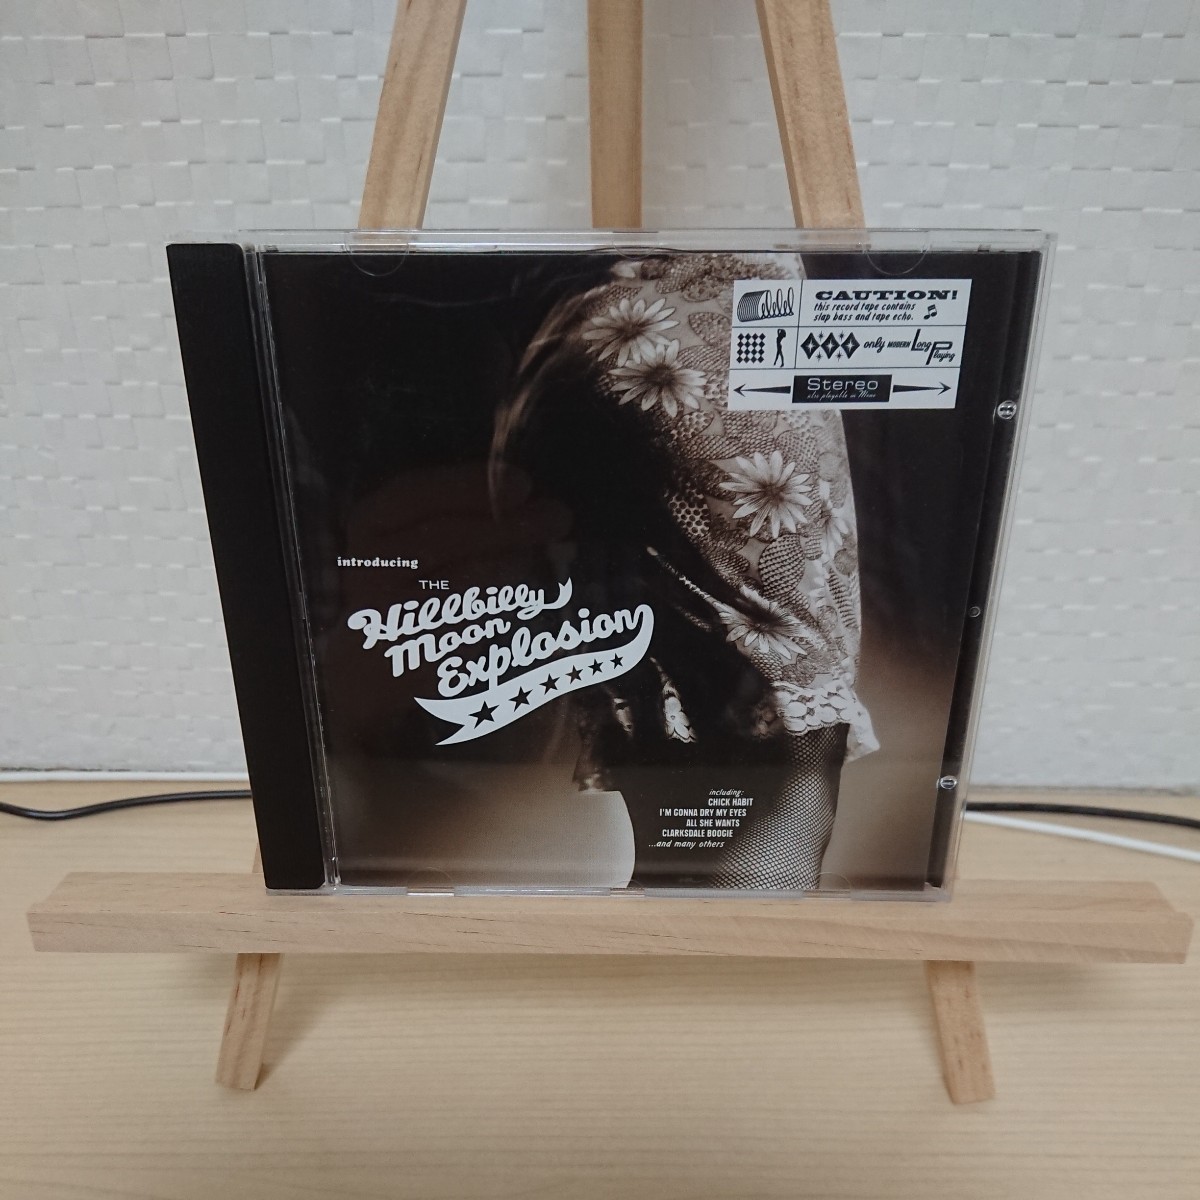 The Hillbilly Moon Explosion/Introducing The Hillbilly Moon Explosion◆ネオロカビリー◆サイコビリー◆Neo Rockabilly◆Psychobilly_画像1